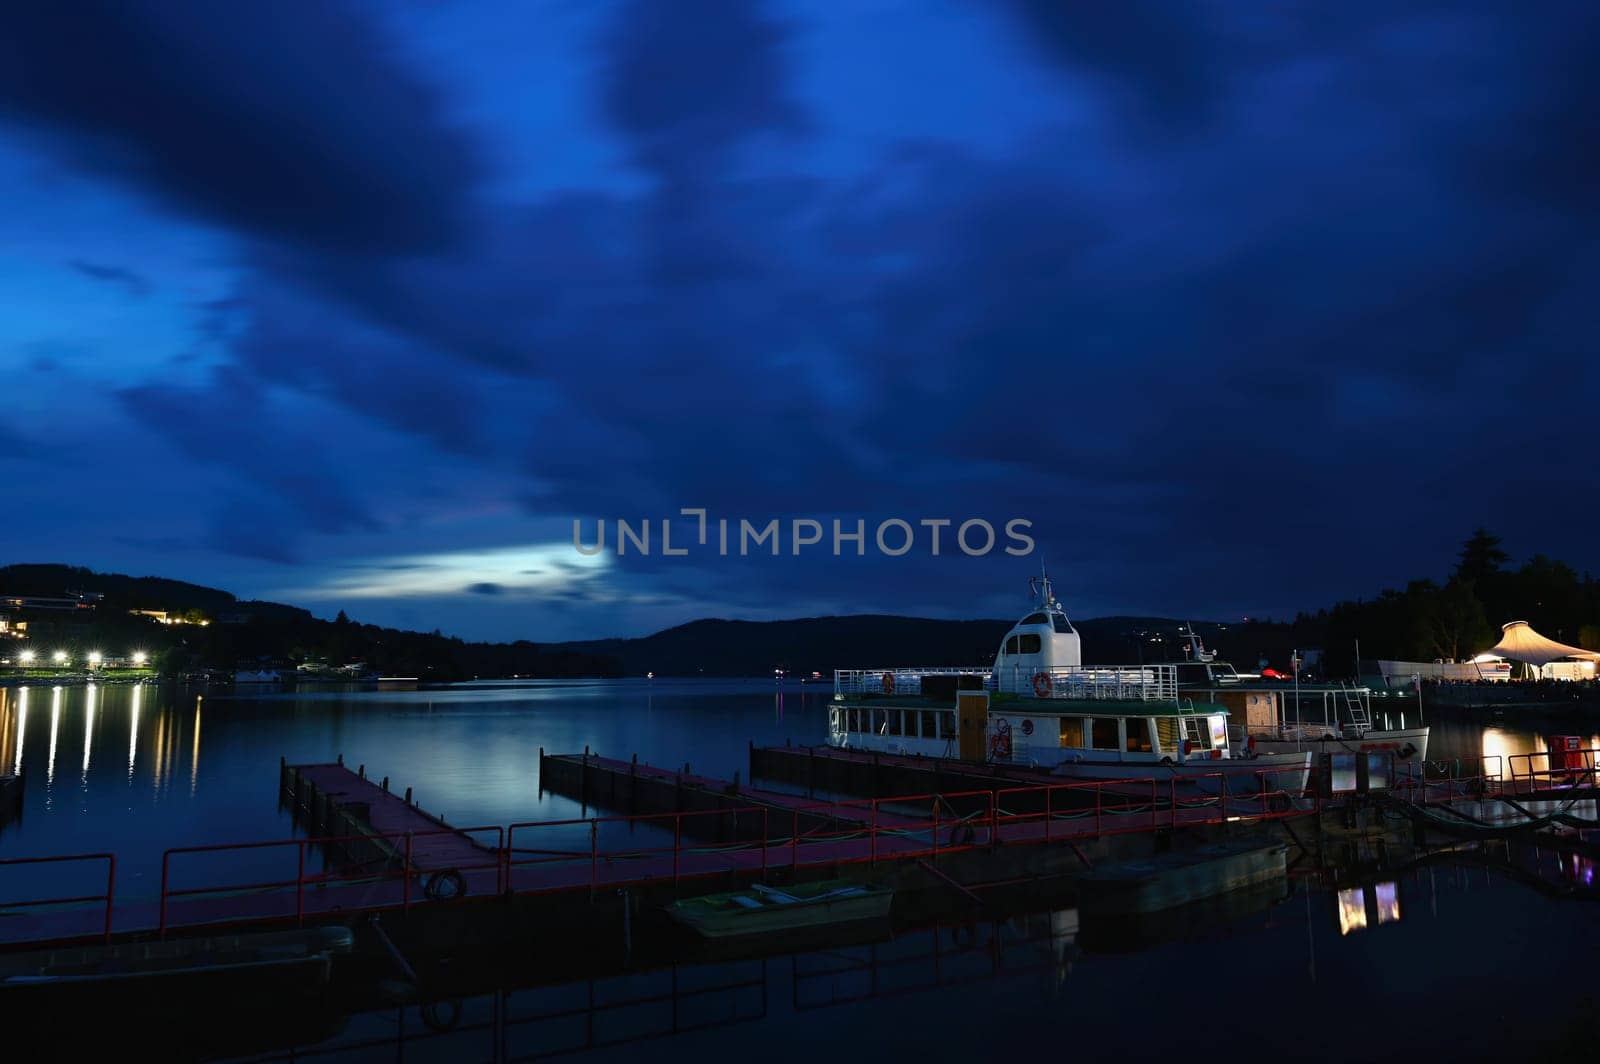 Brno Reservoir - Czech Republic, city of Brno. Evening in the blue hour. Ship in port. by Montypeter